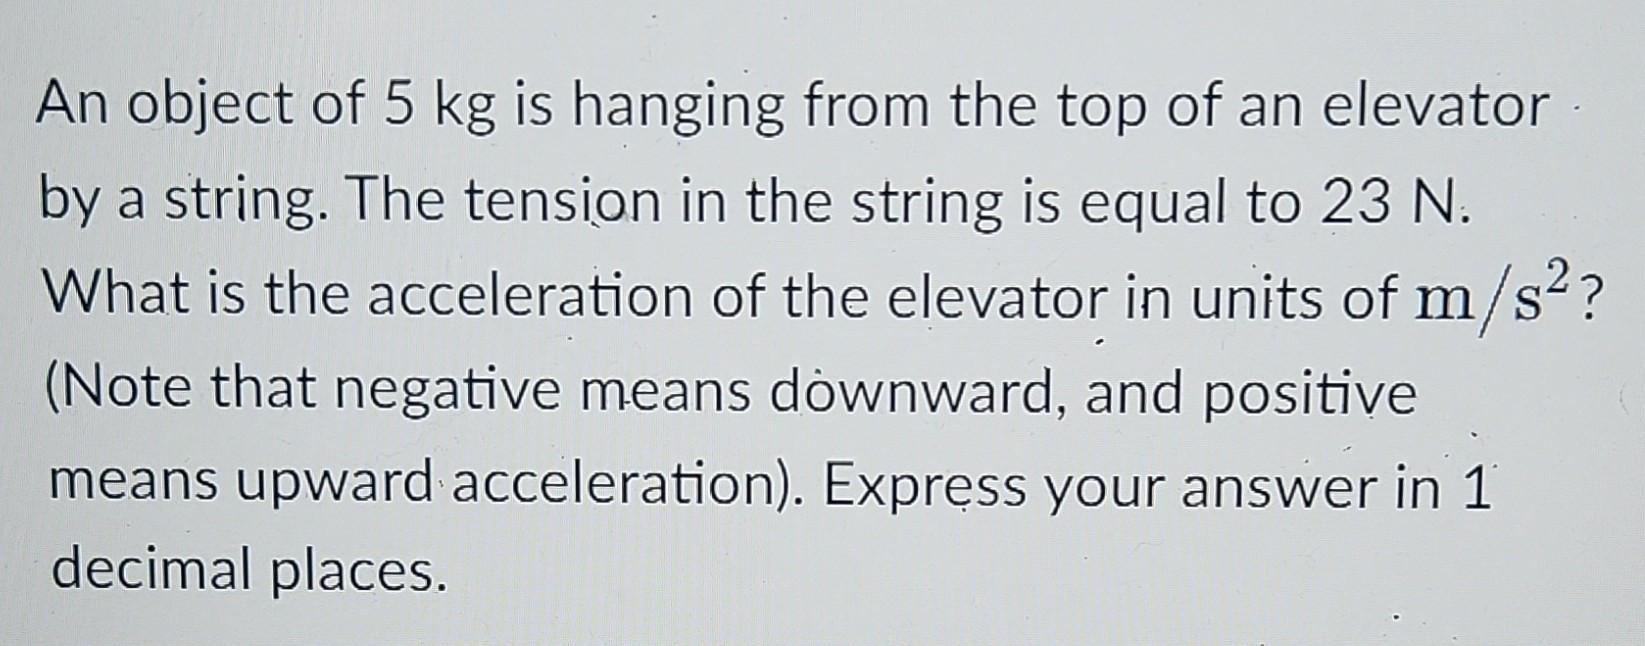 An object of 5 kg is hanging from the top of an elevator by a string. The tension in the string is equal to